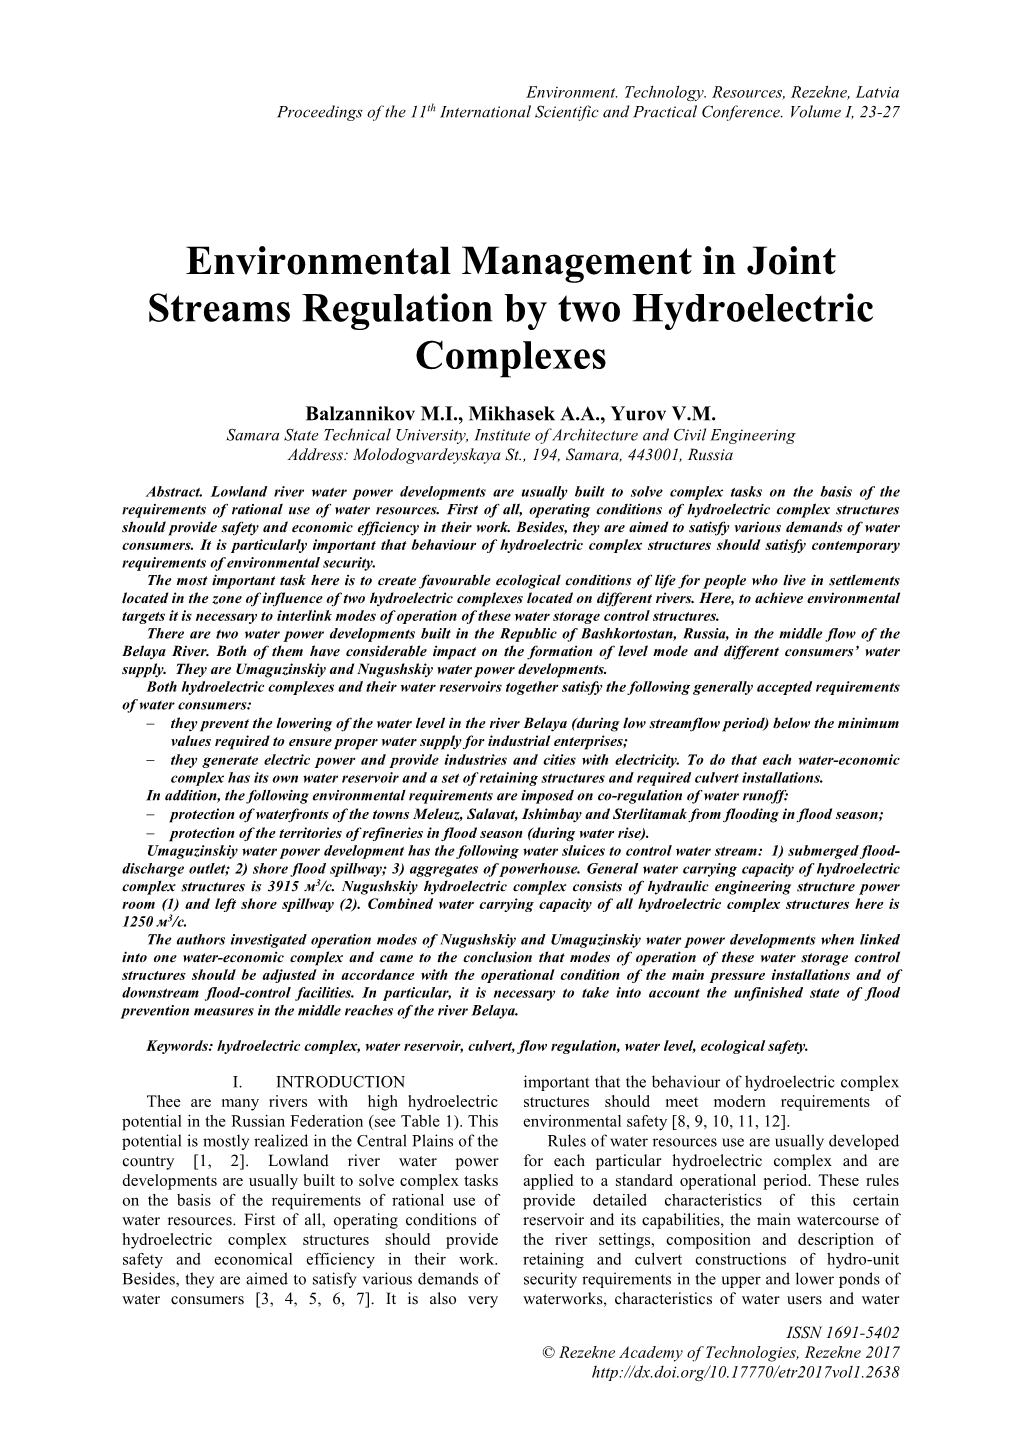 Environmental Management in Joint Streams Regulation by Two Hydroelectric Complexes